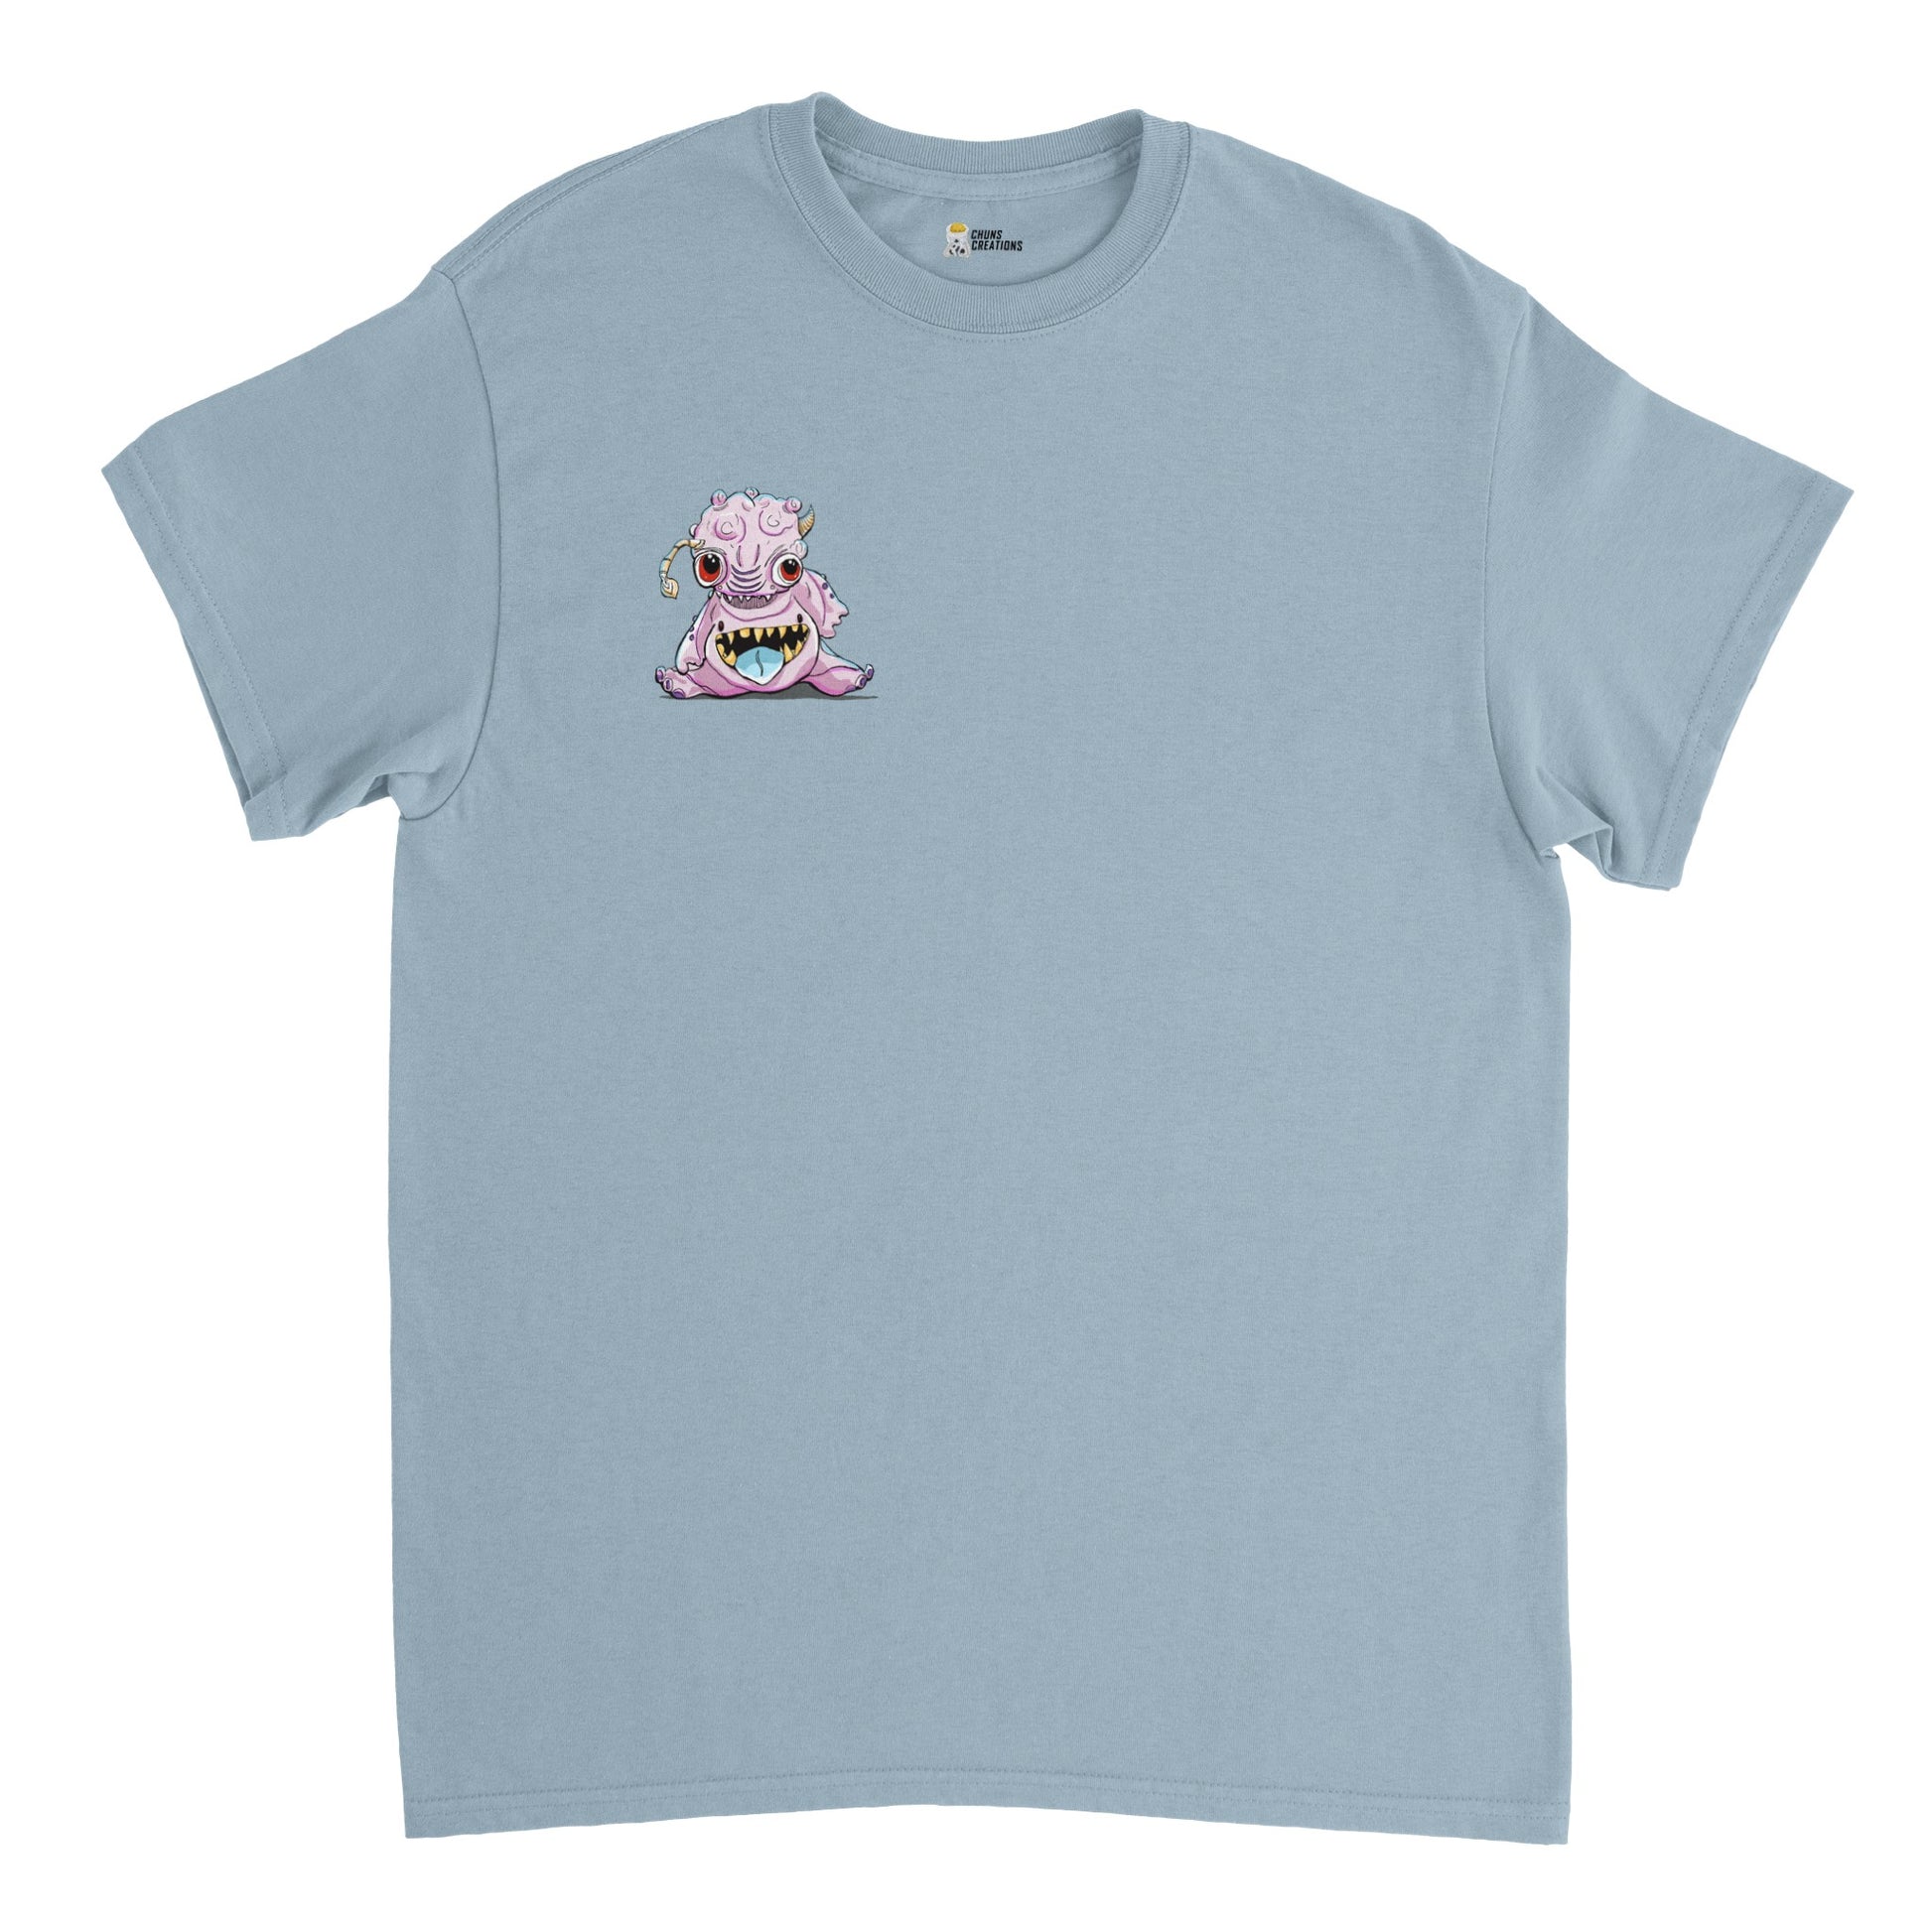 Pale blue shirt. With a pink bublegum looking alien creature on the front of the shirt small "pocket sized" display on the front left